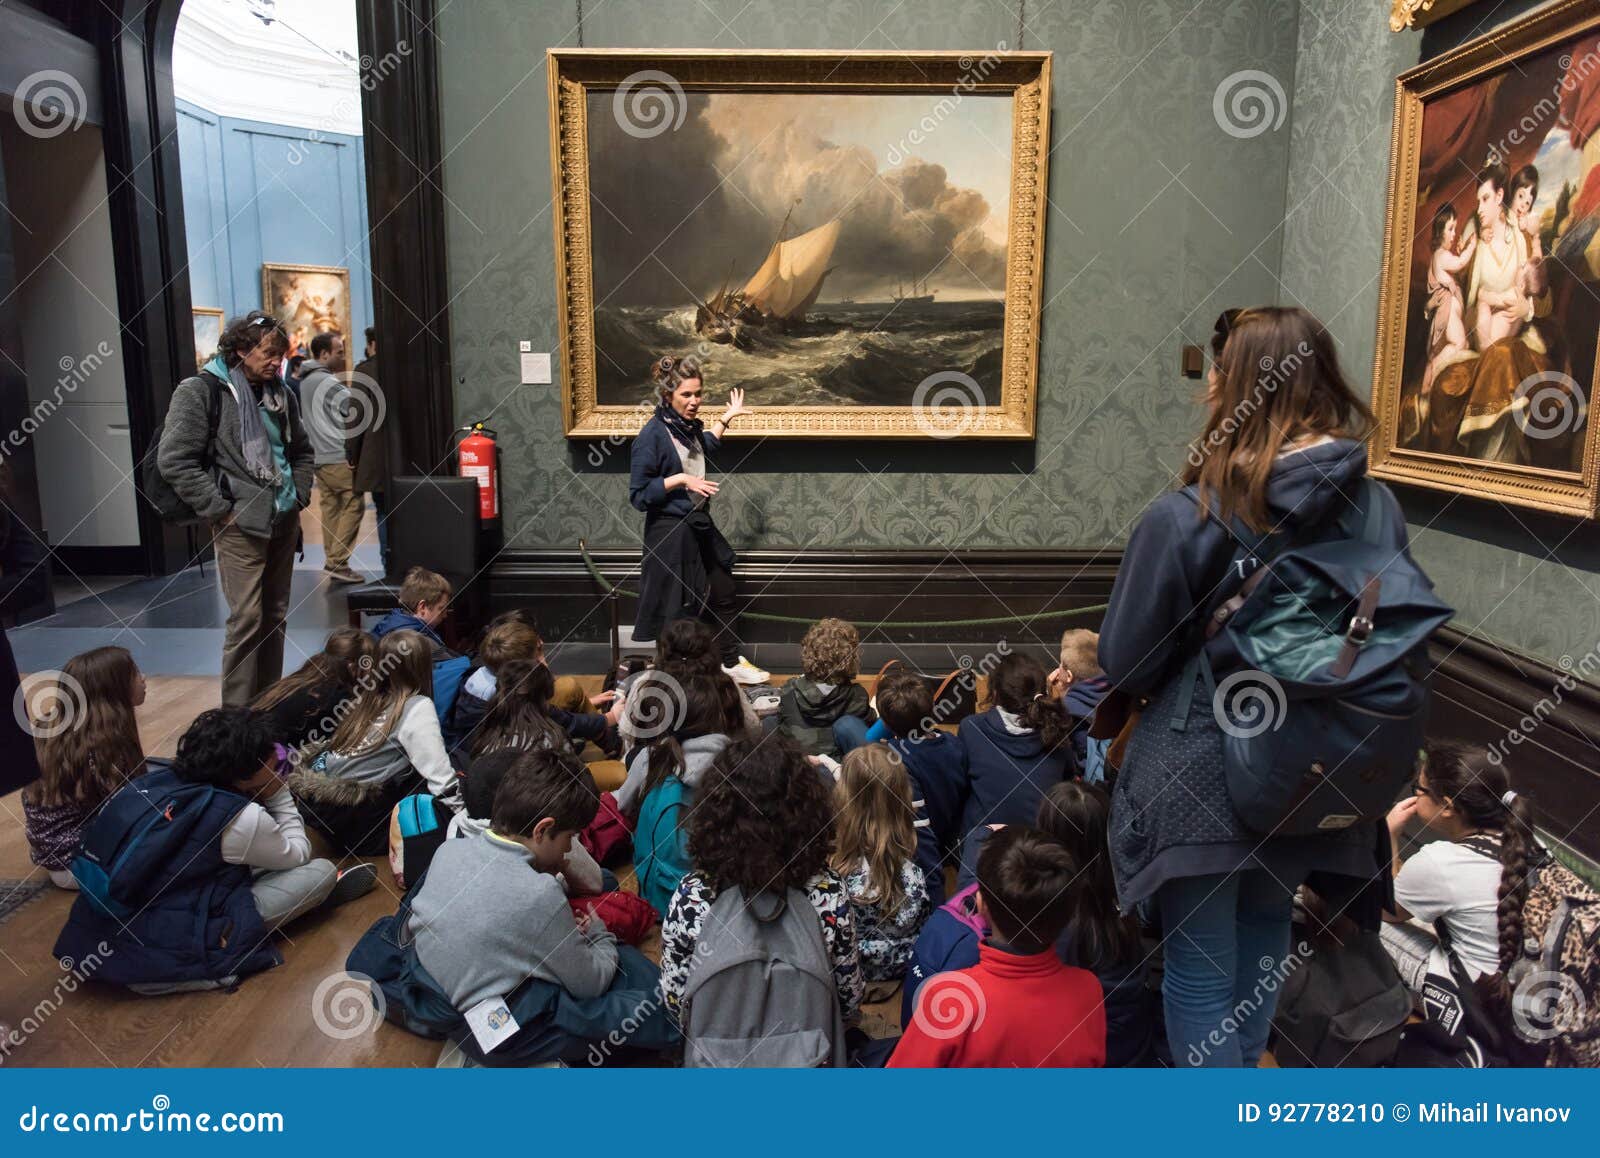 national gallery docent tours